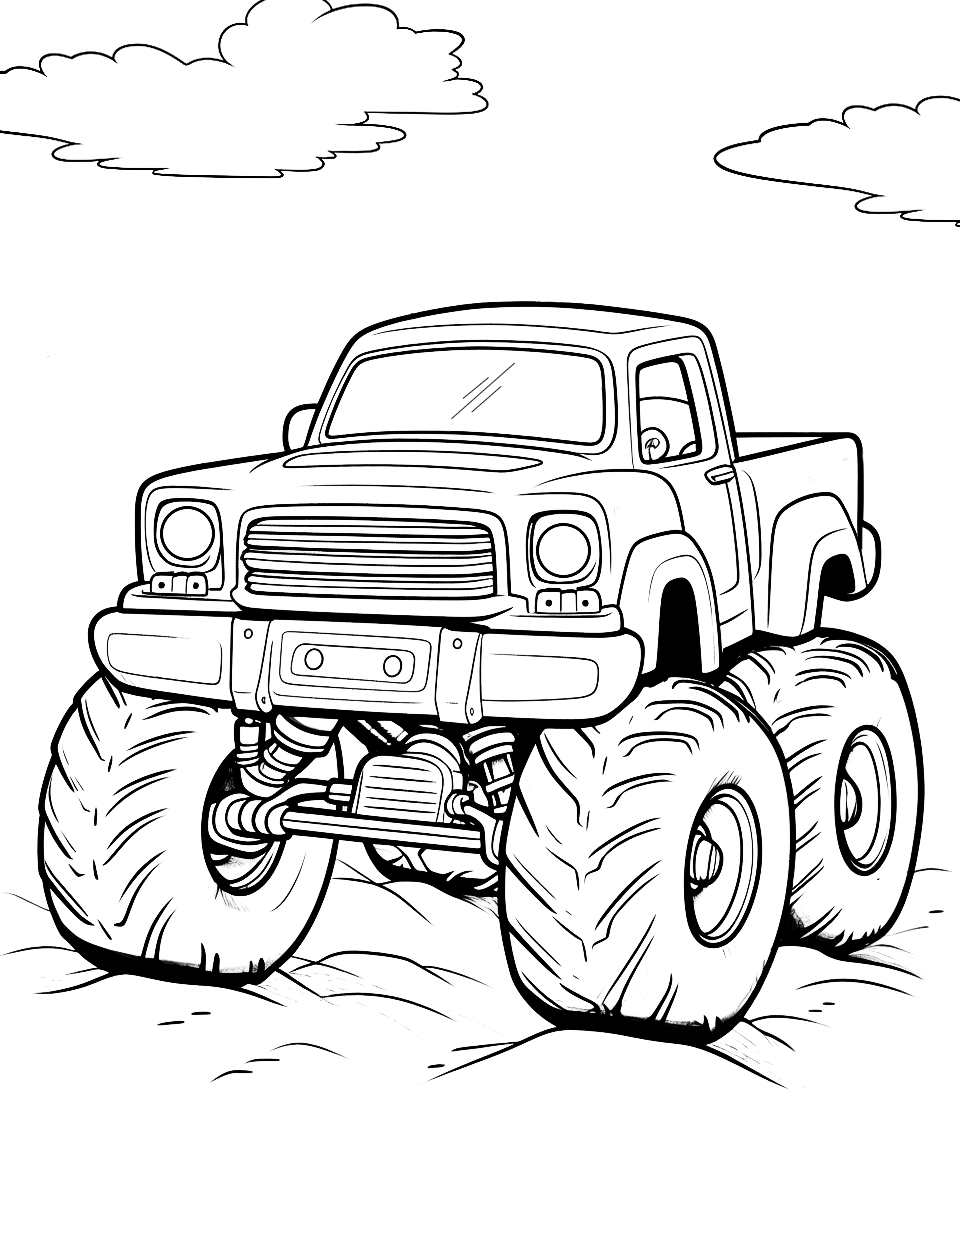 Simple Truck Monster Coloring Page - A basic design of a monster truck, perfect for preschoolers.